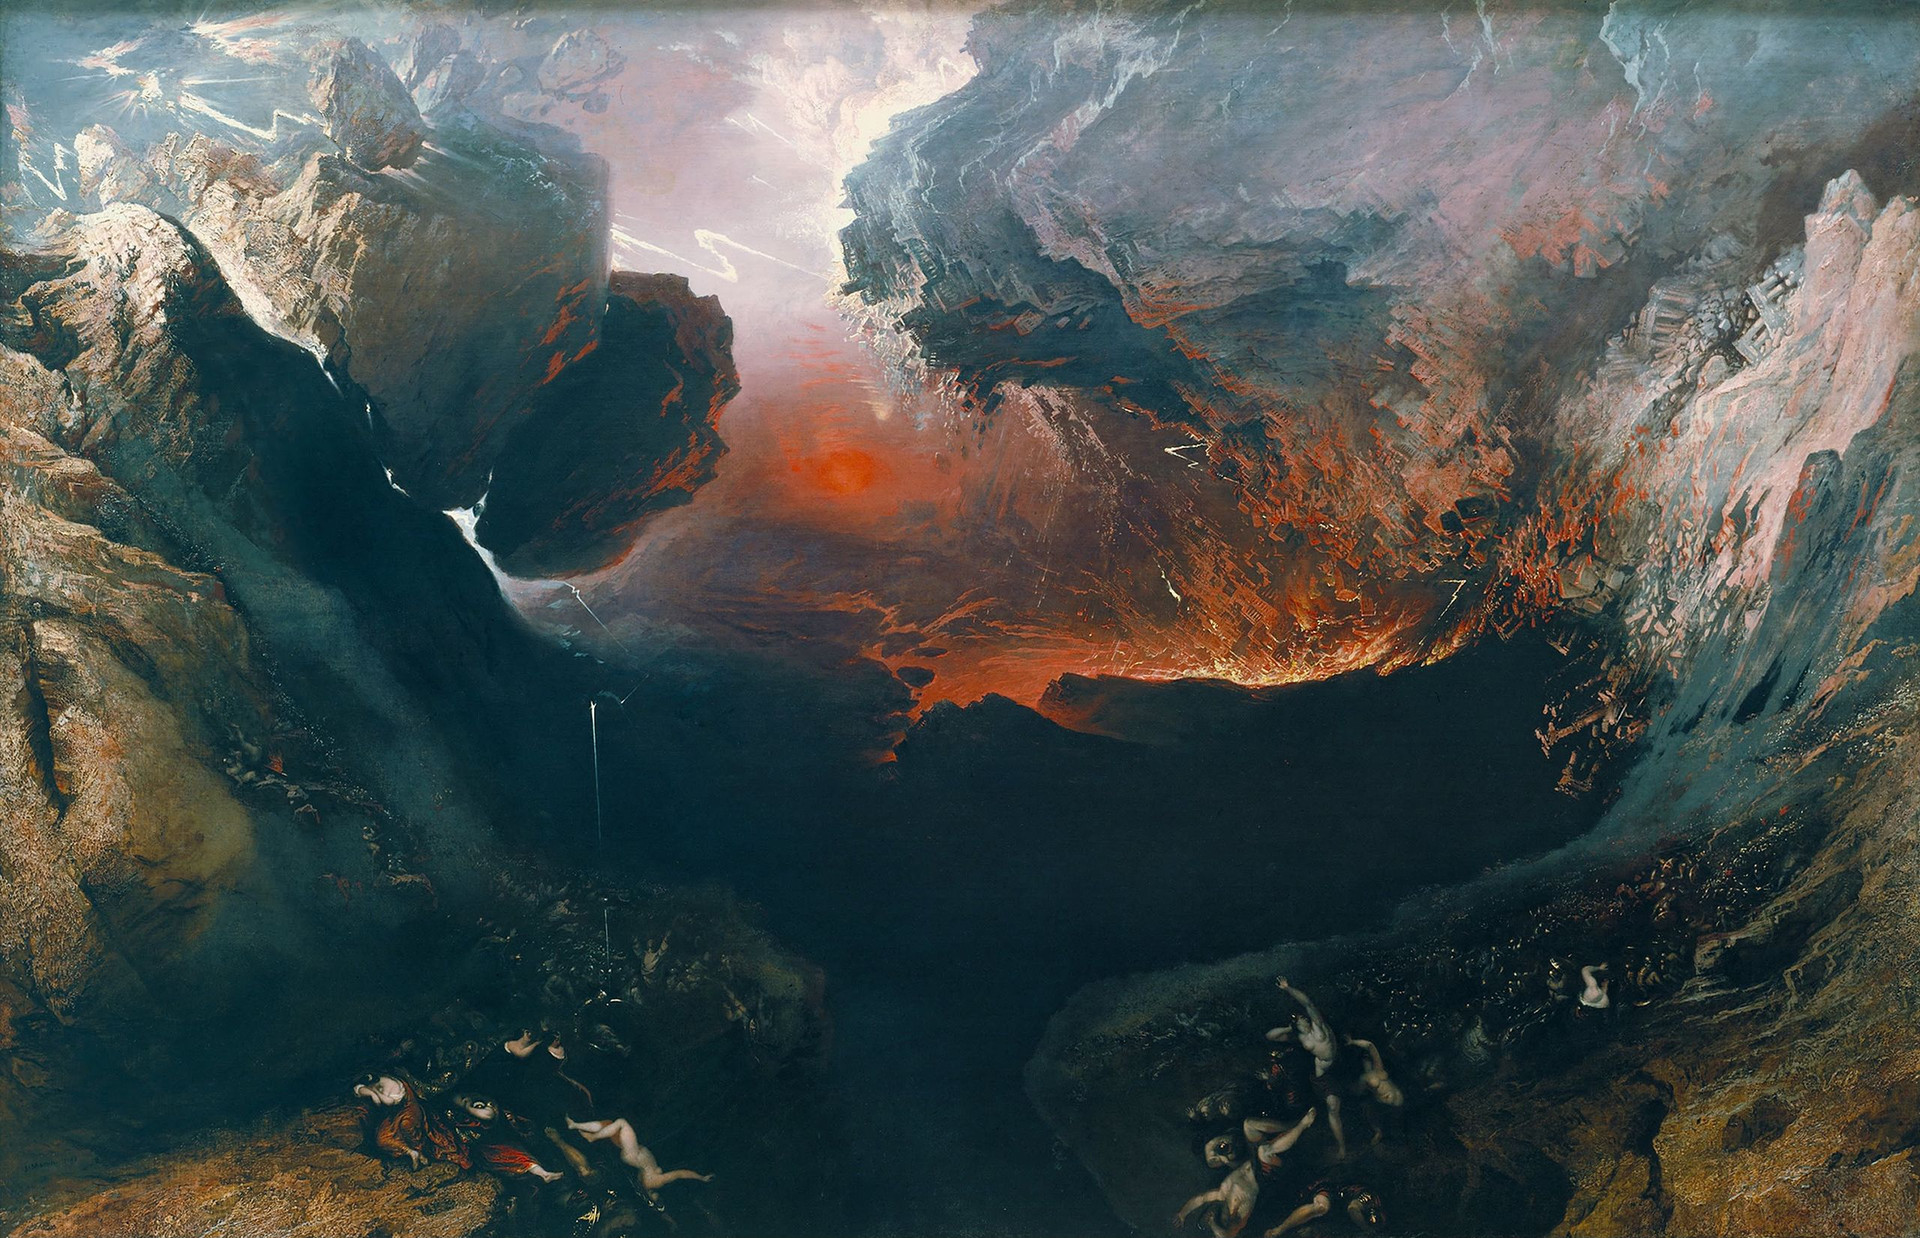 John Martin. The Great Day of His Warth. 1853